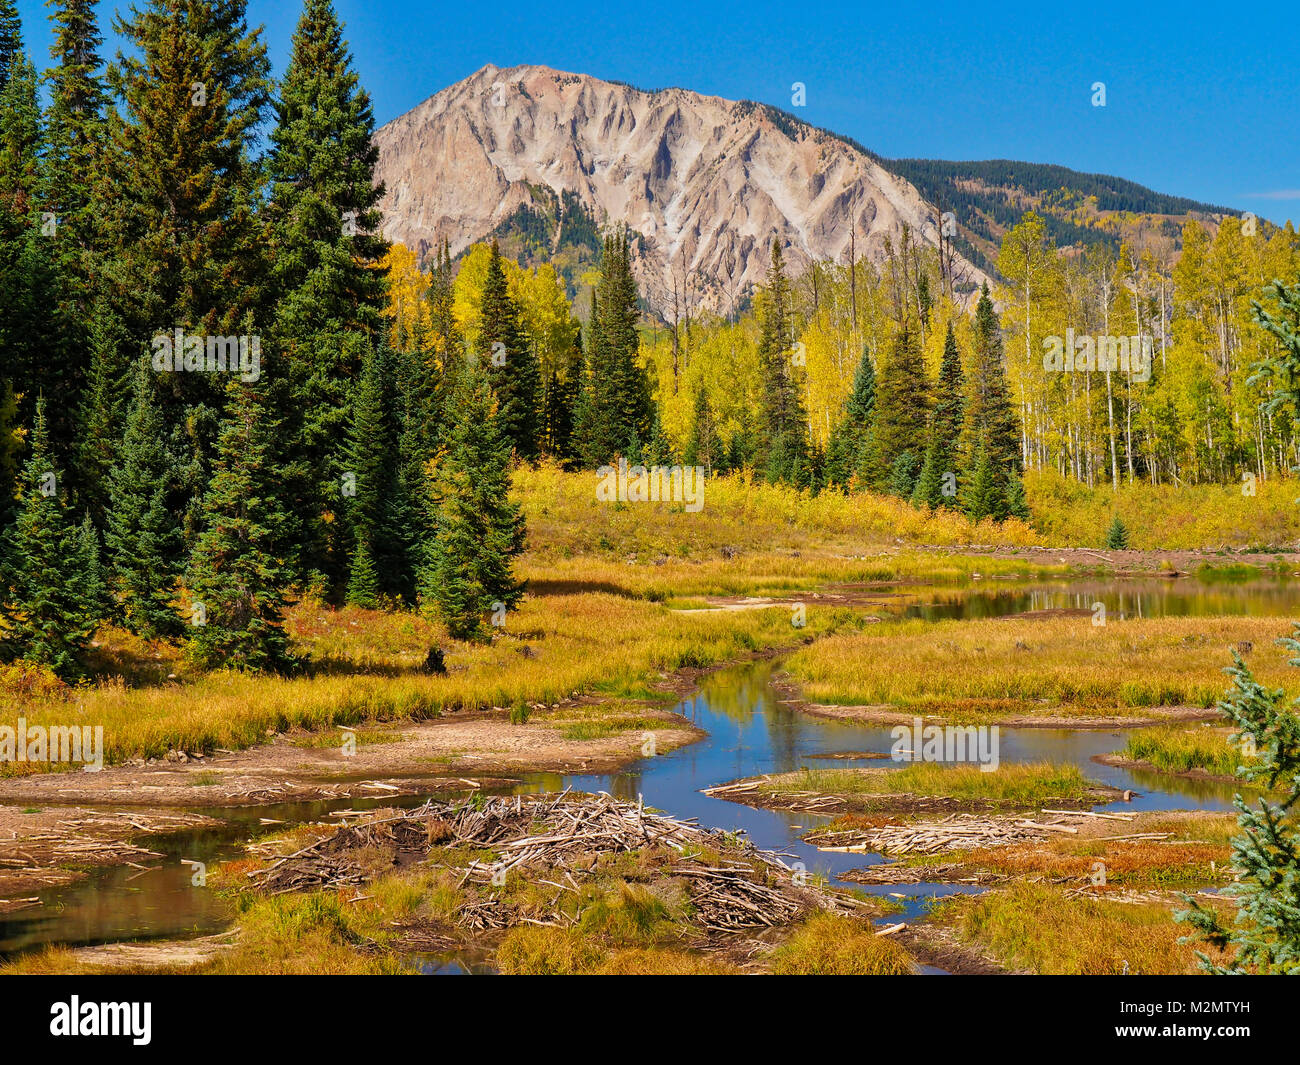 Marcellina Mountain, Horse Ranch Park Loop Trail, Kebler Pass, Crested Butte, Colorado, USA Stock Photo